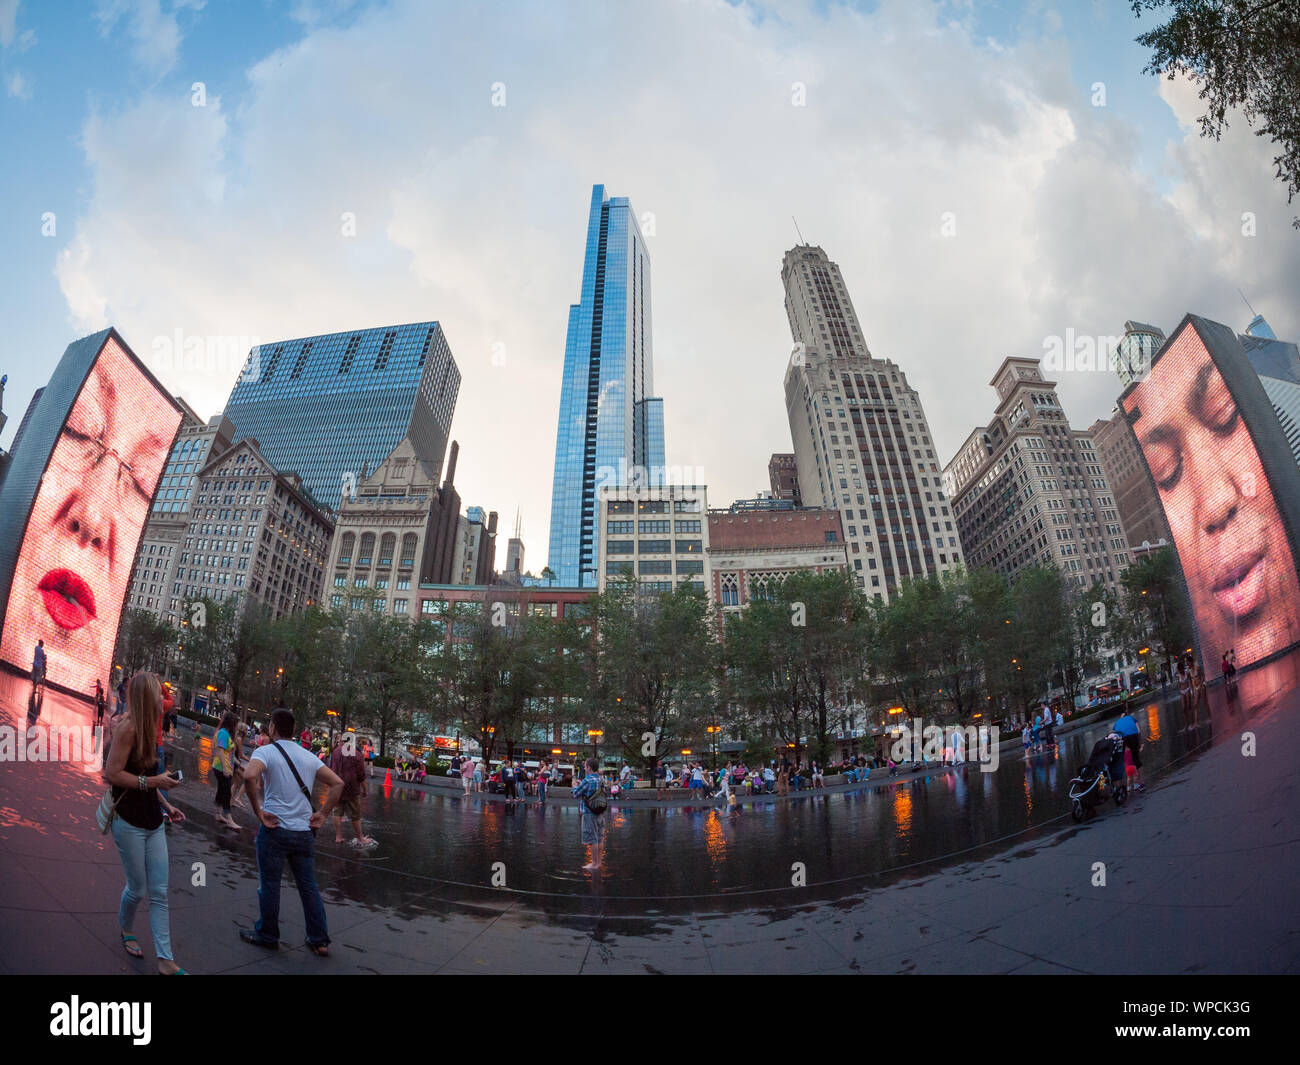 A wide angle, fisheye view of Jaume Plensa's popular Crown Fountain work of public art in Millennium Park, Chicago, Illinois. Stock Photo